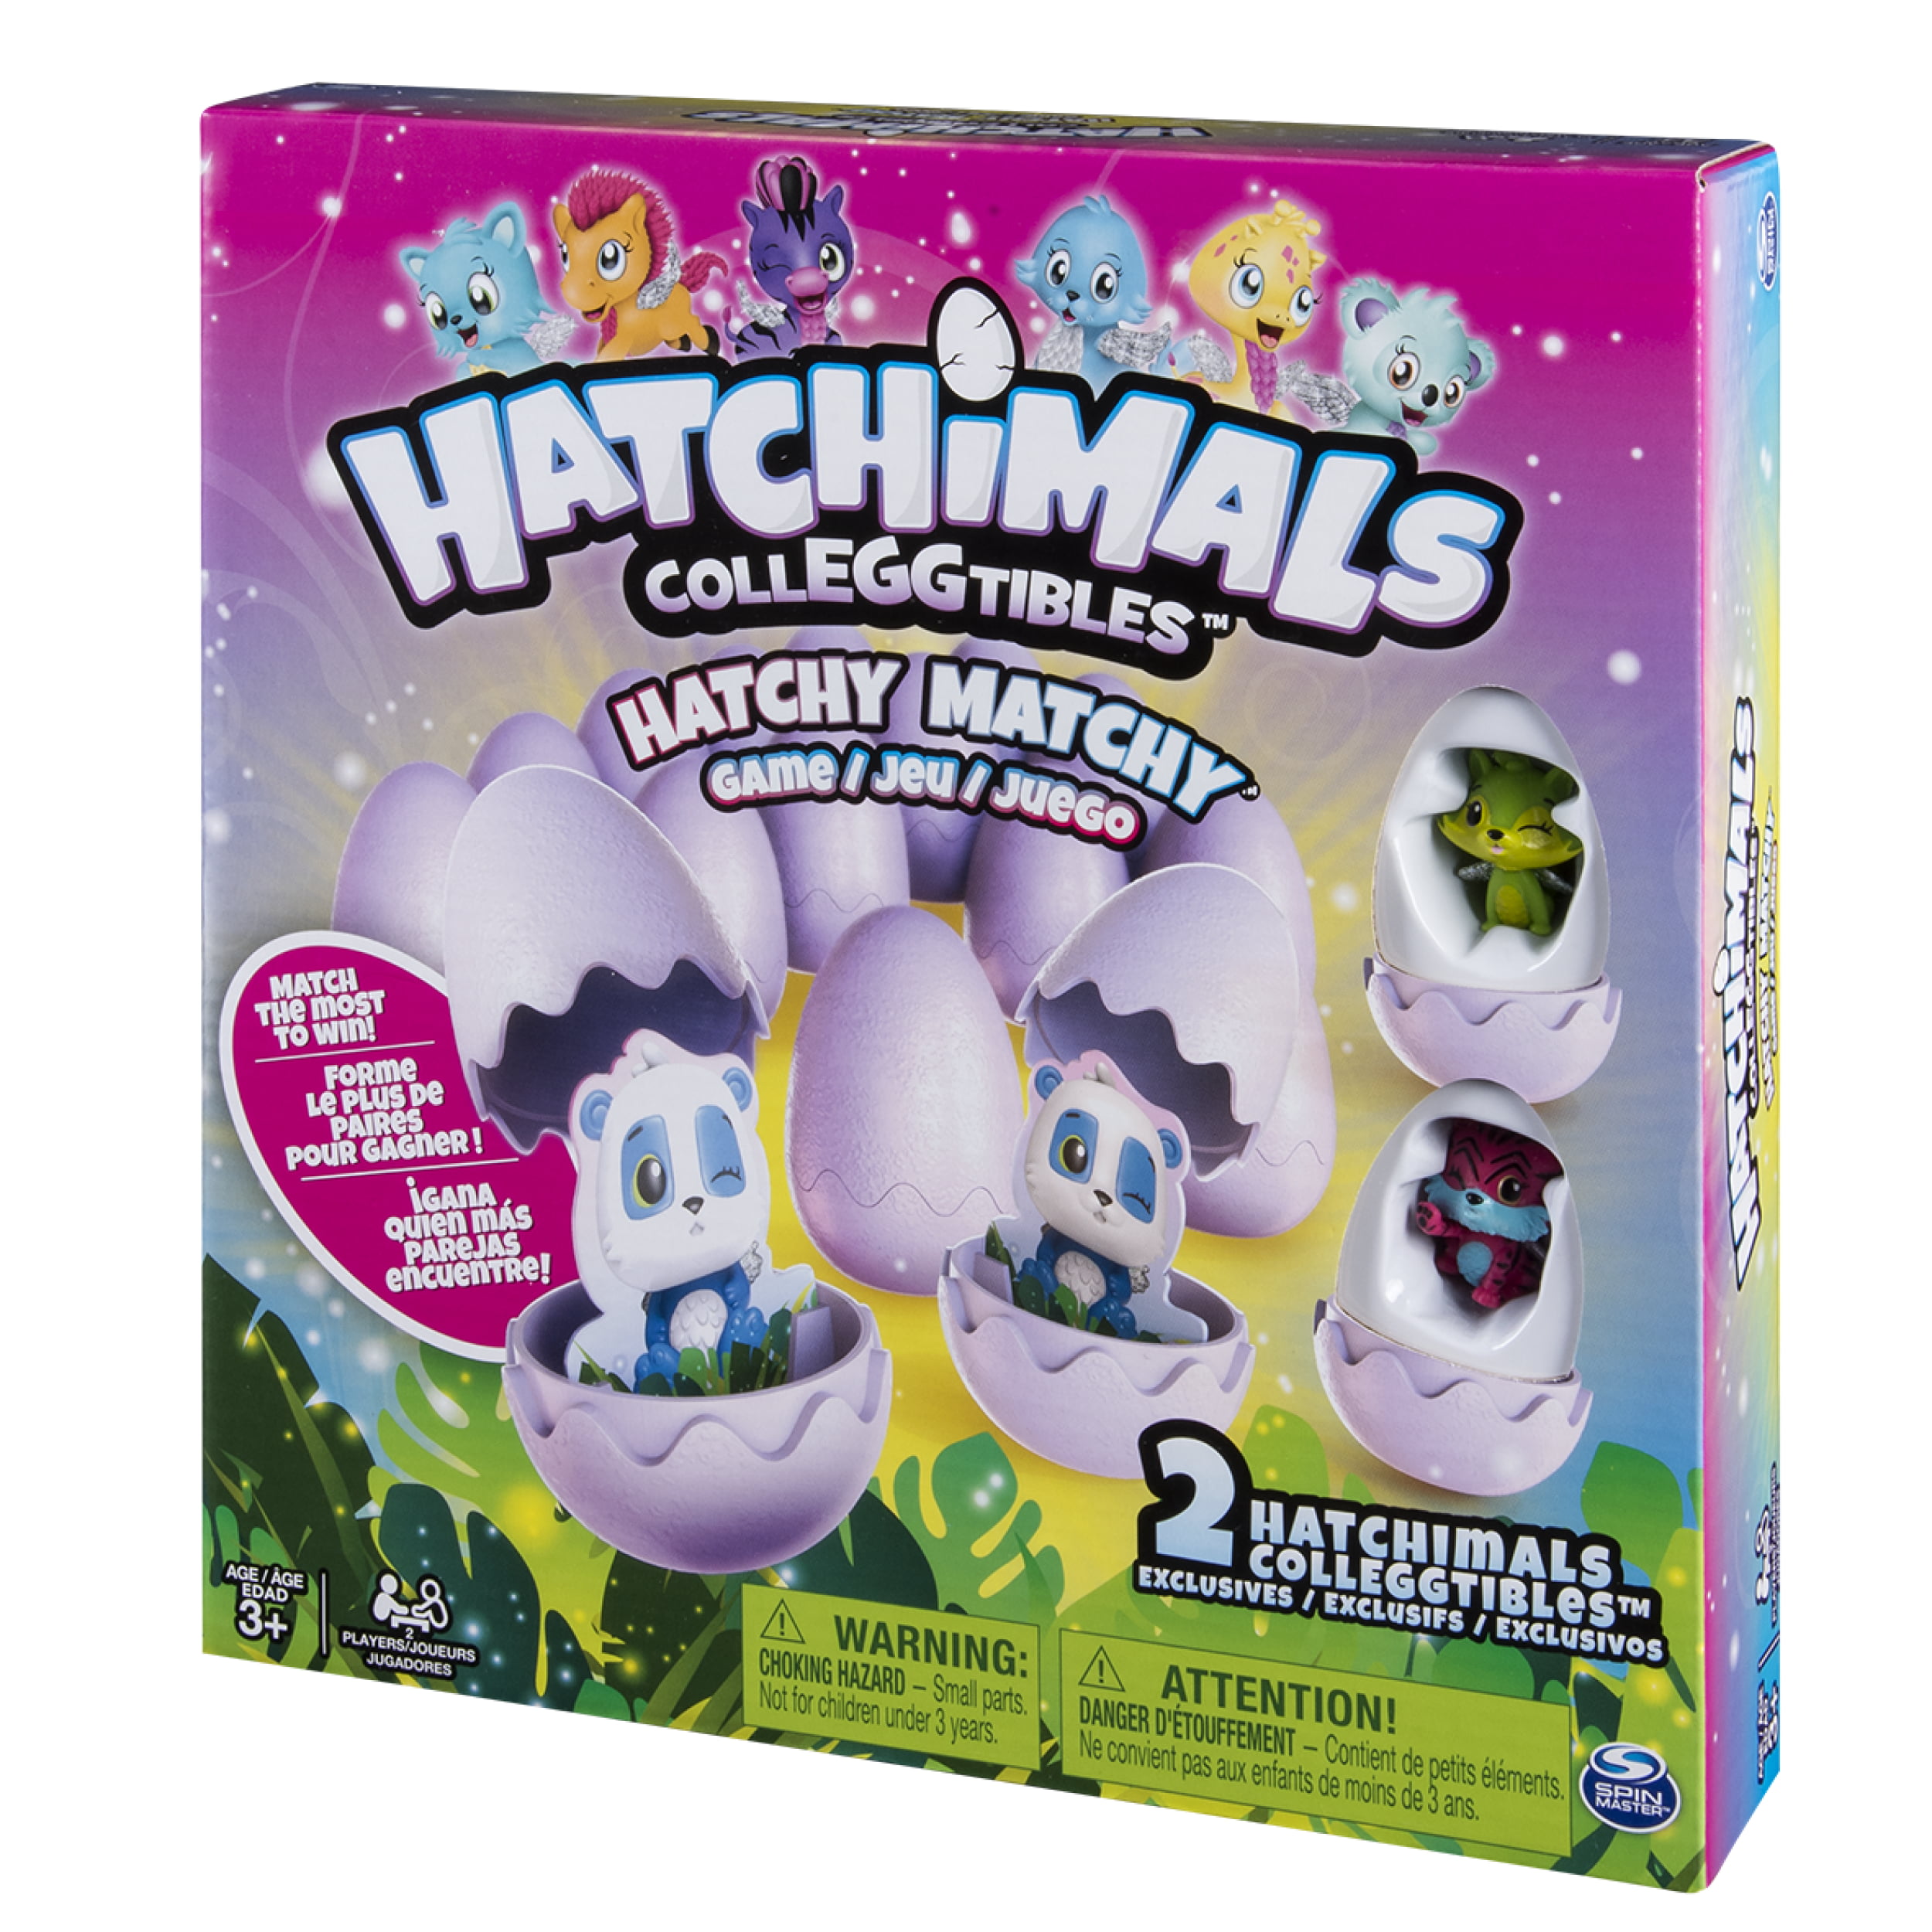 Hatchy Matchy Matching Game Hatchimals Colleggtibles 